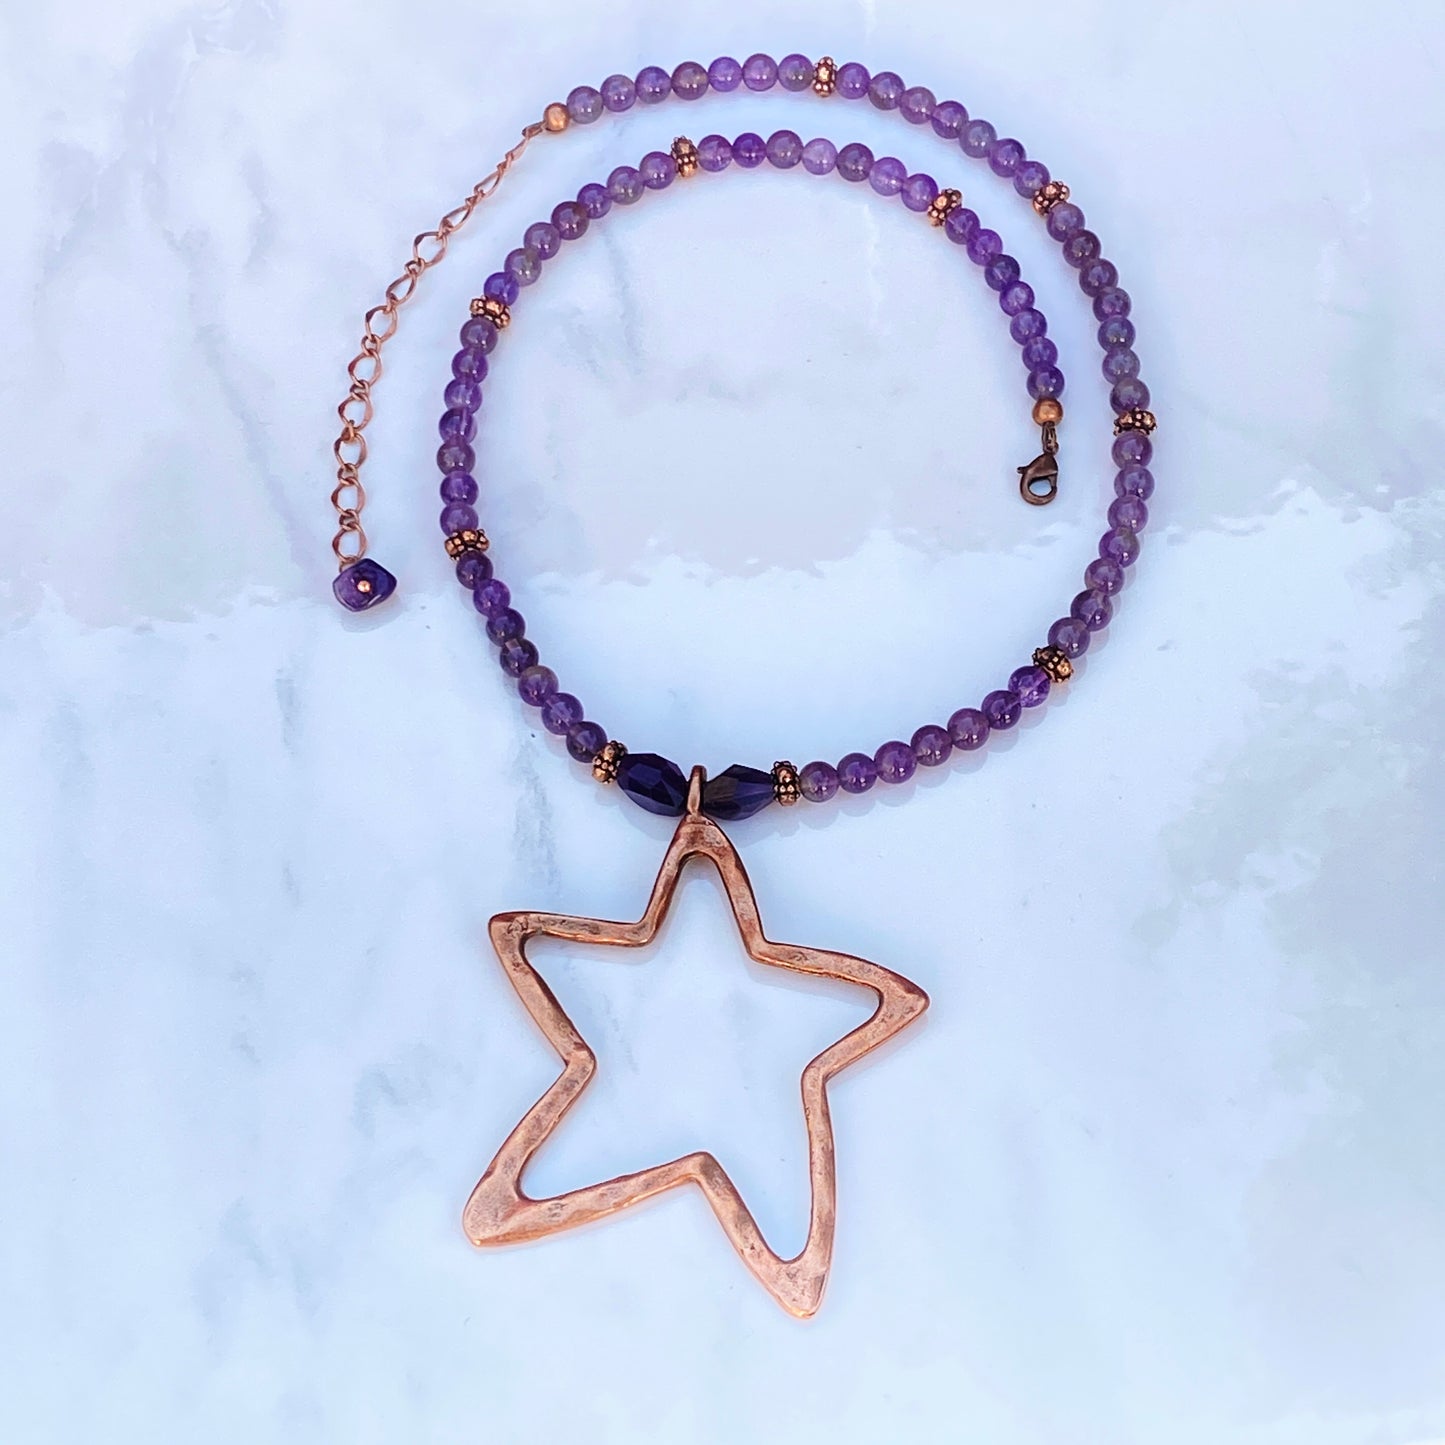 Amethyst and Copper Star pendant Necklace